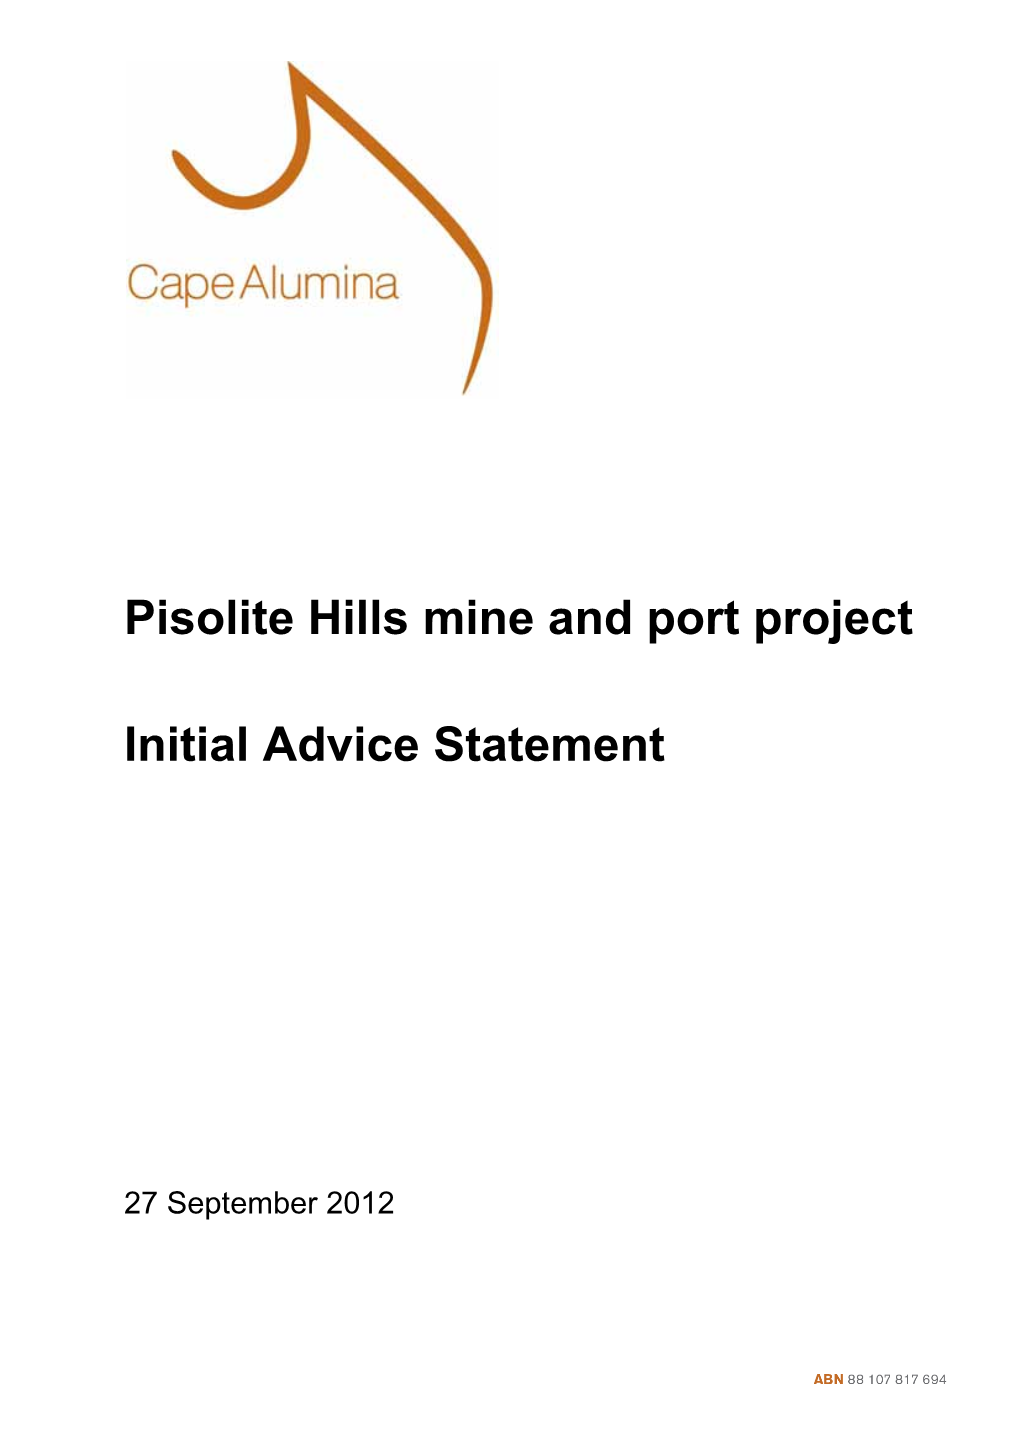 Pisolite Hills Mine and Port Project Initial Advice Statement